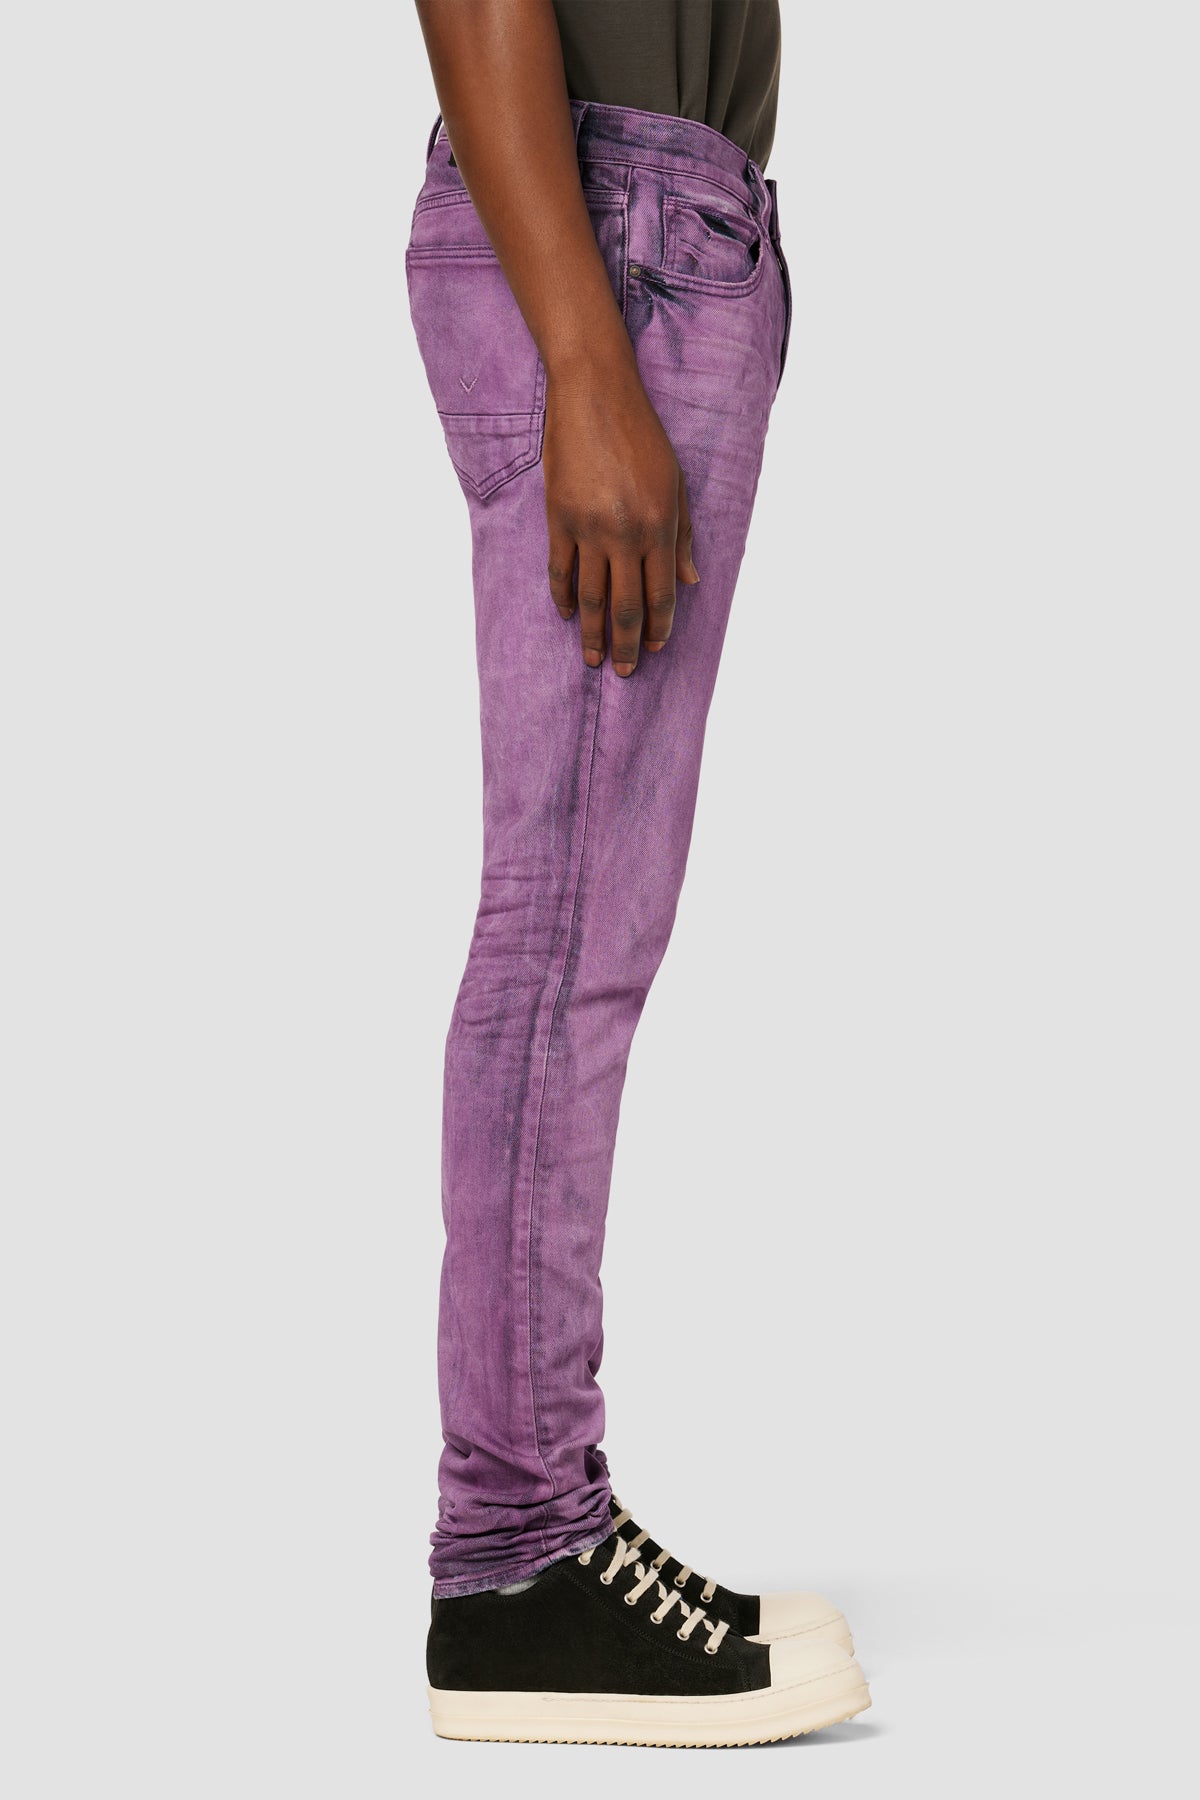 New Mens Purple jeans size 30 inseam of 32” inches Rise of 11